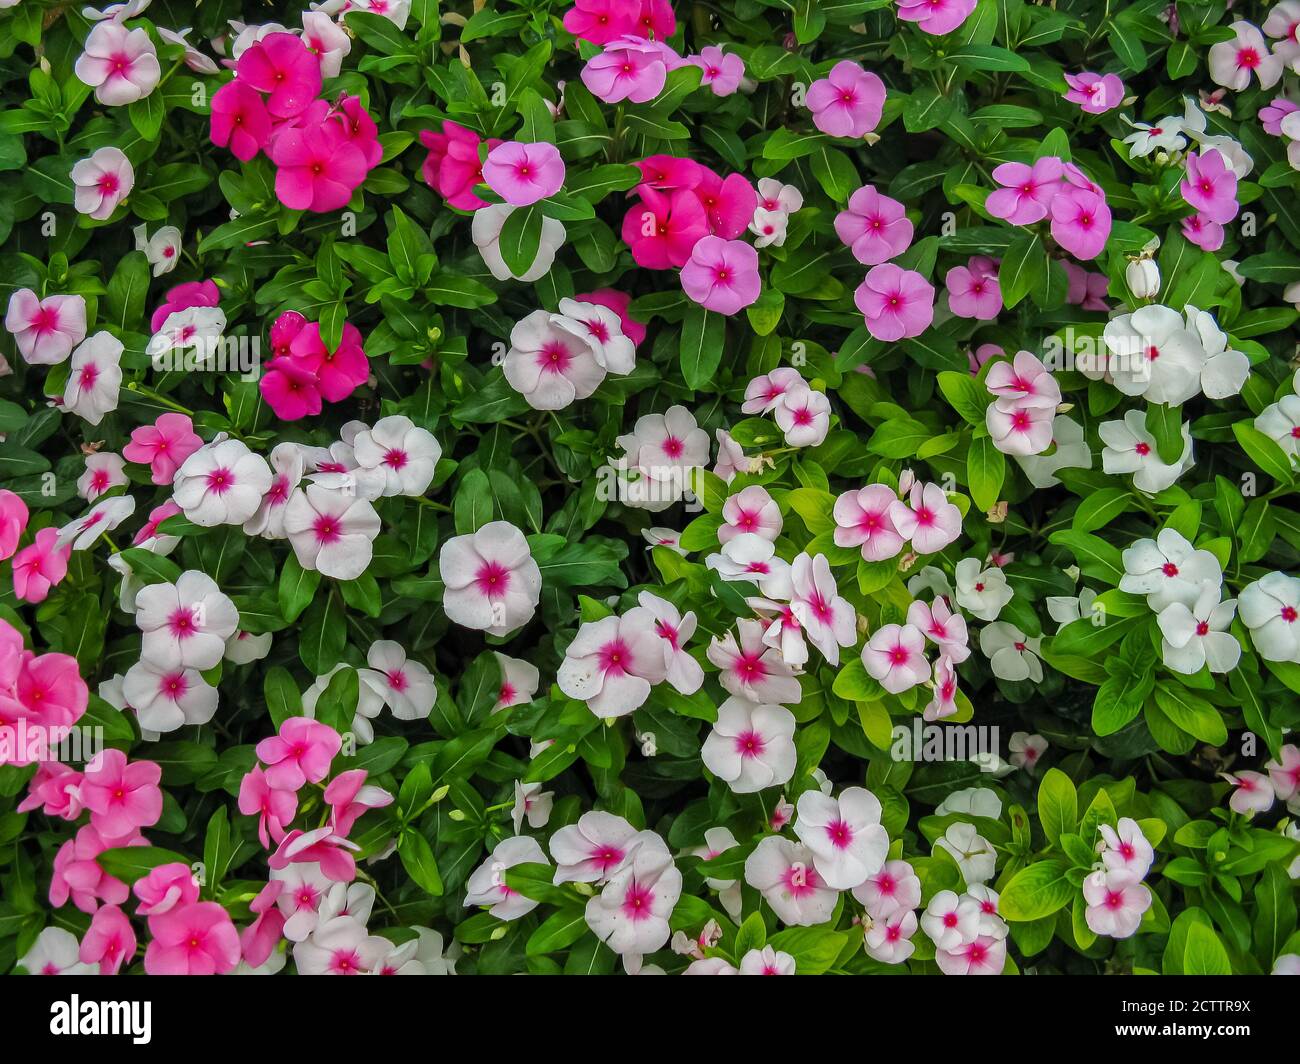 Colorful flowers blooming in a garden with variety of vibrant colors a Stock Photo